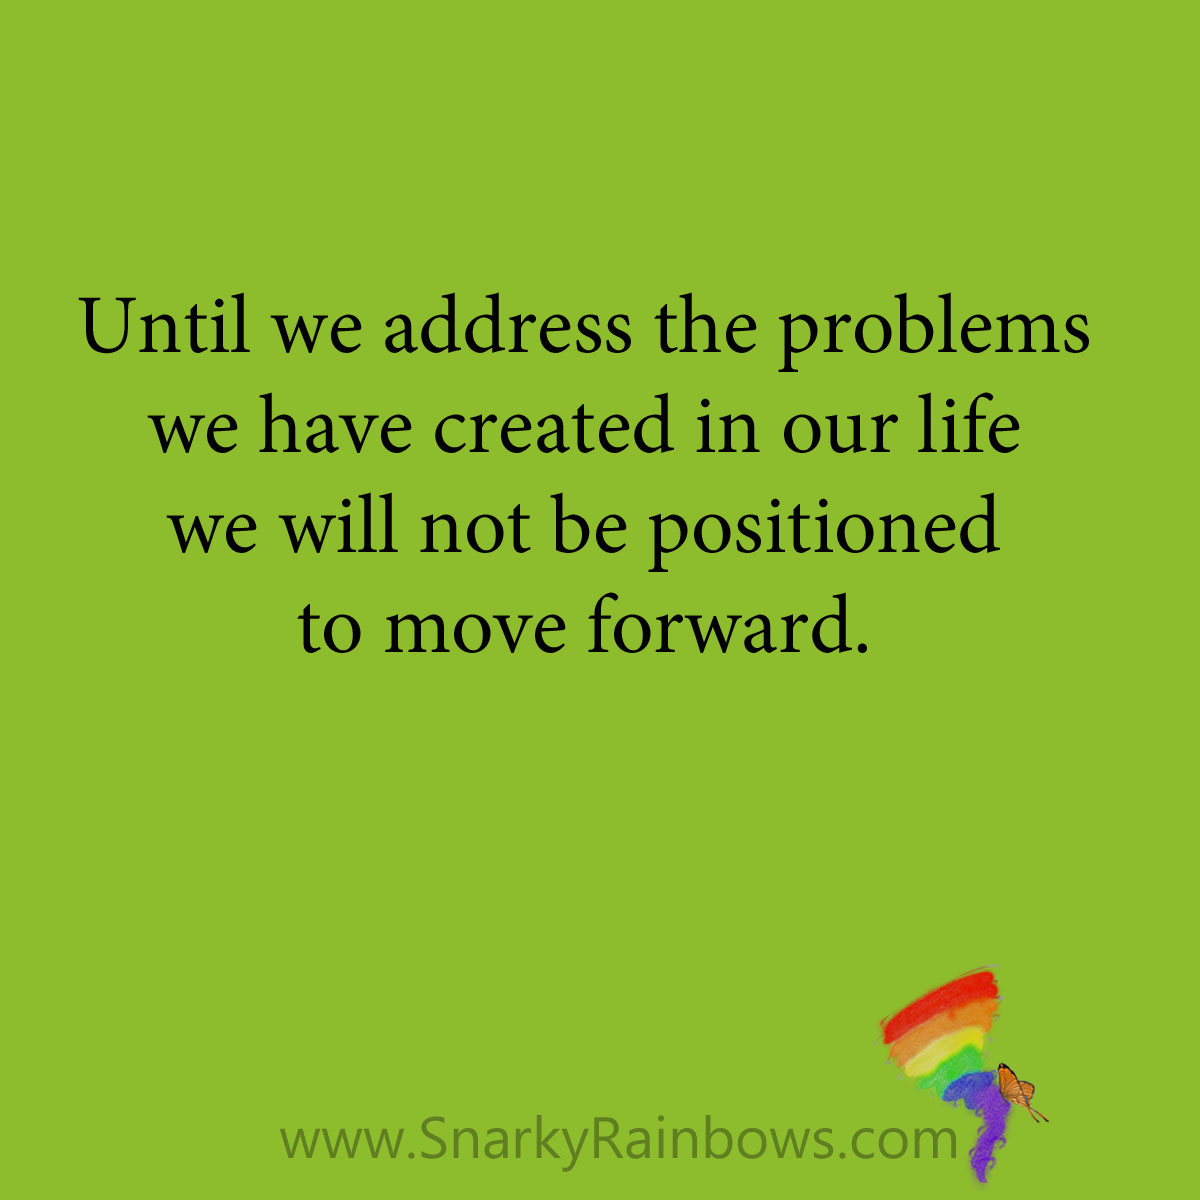 Snarky Rainbows quote - address the problem